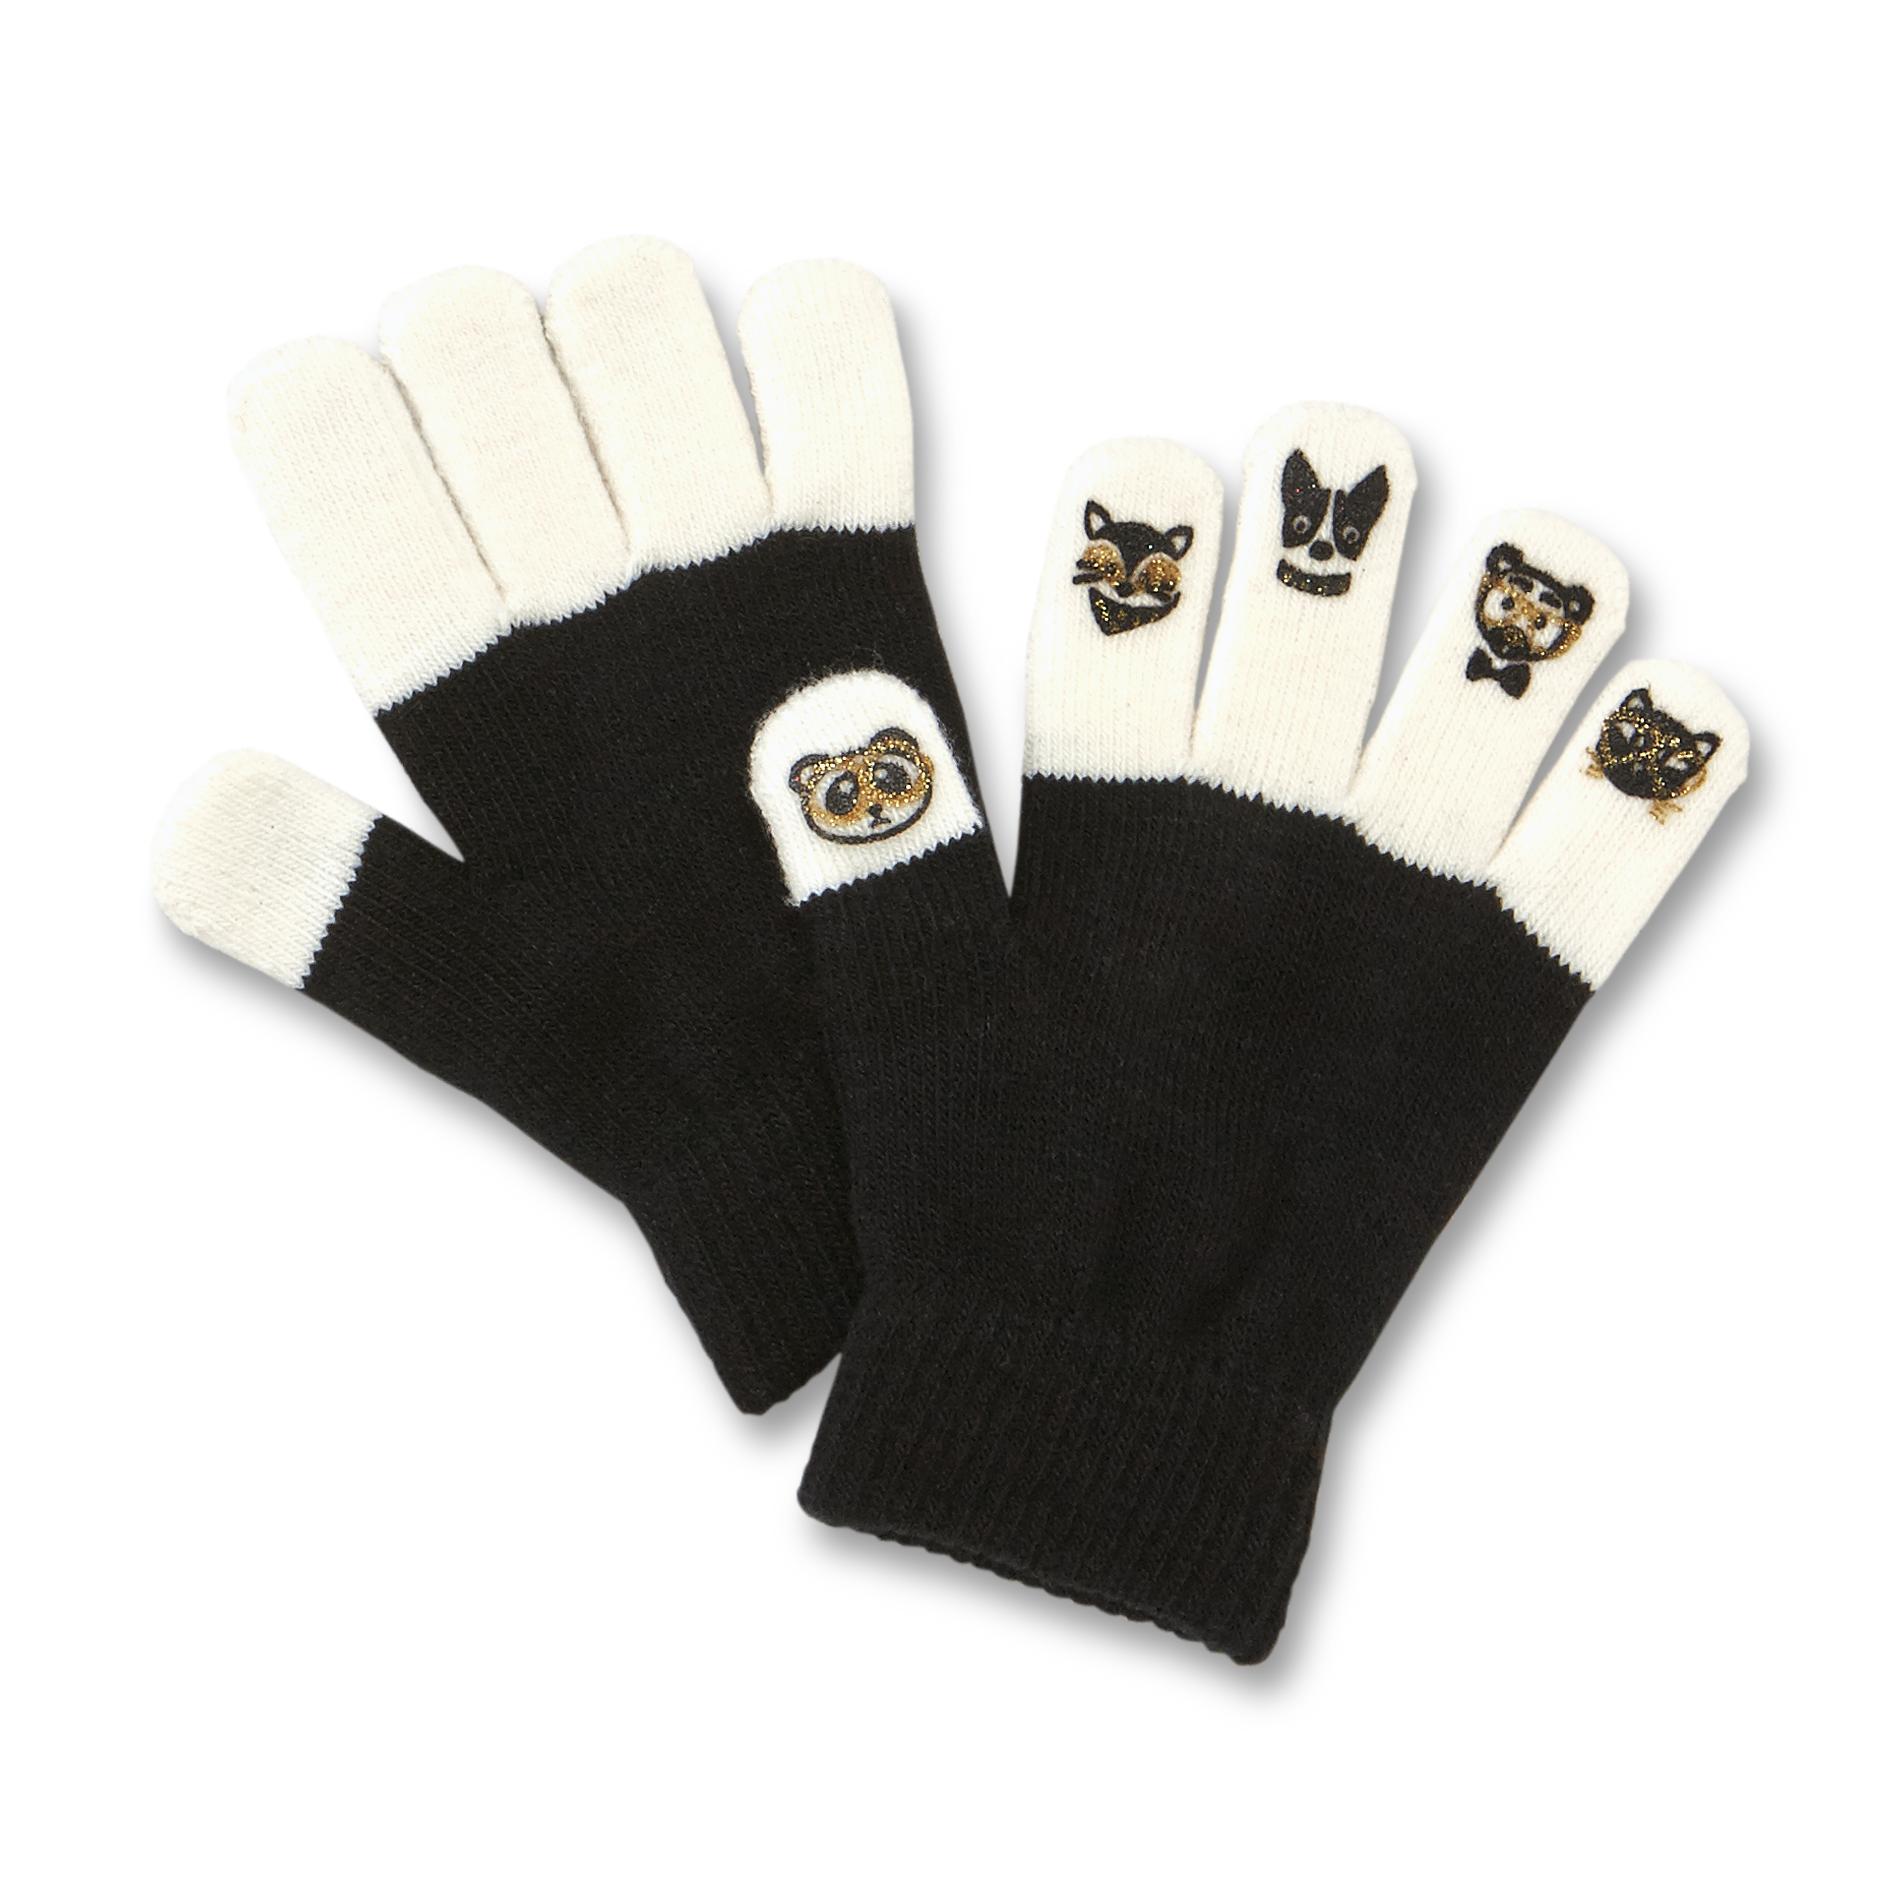 Joe Boxer Junior's Graphic Stretch Gloves - Cats & Dogs